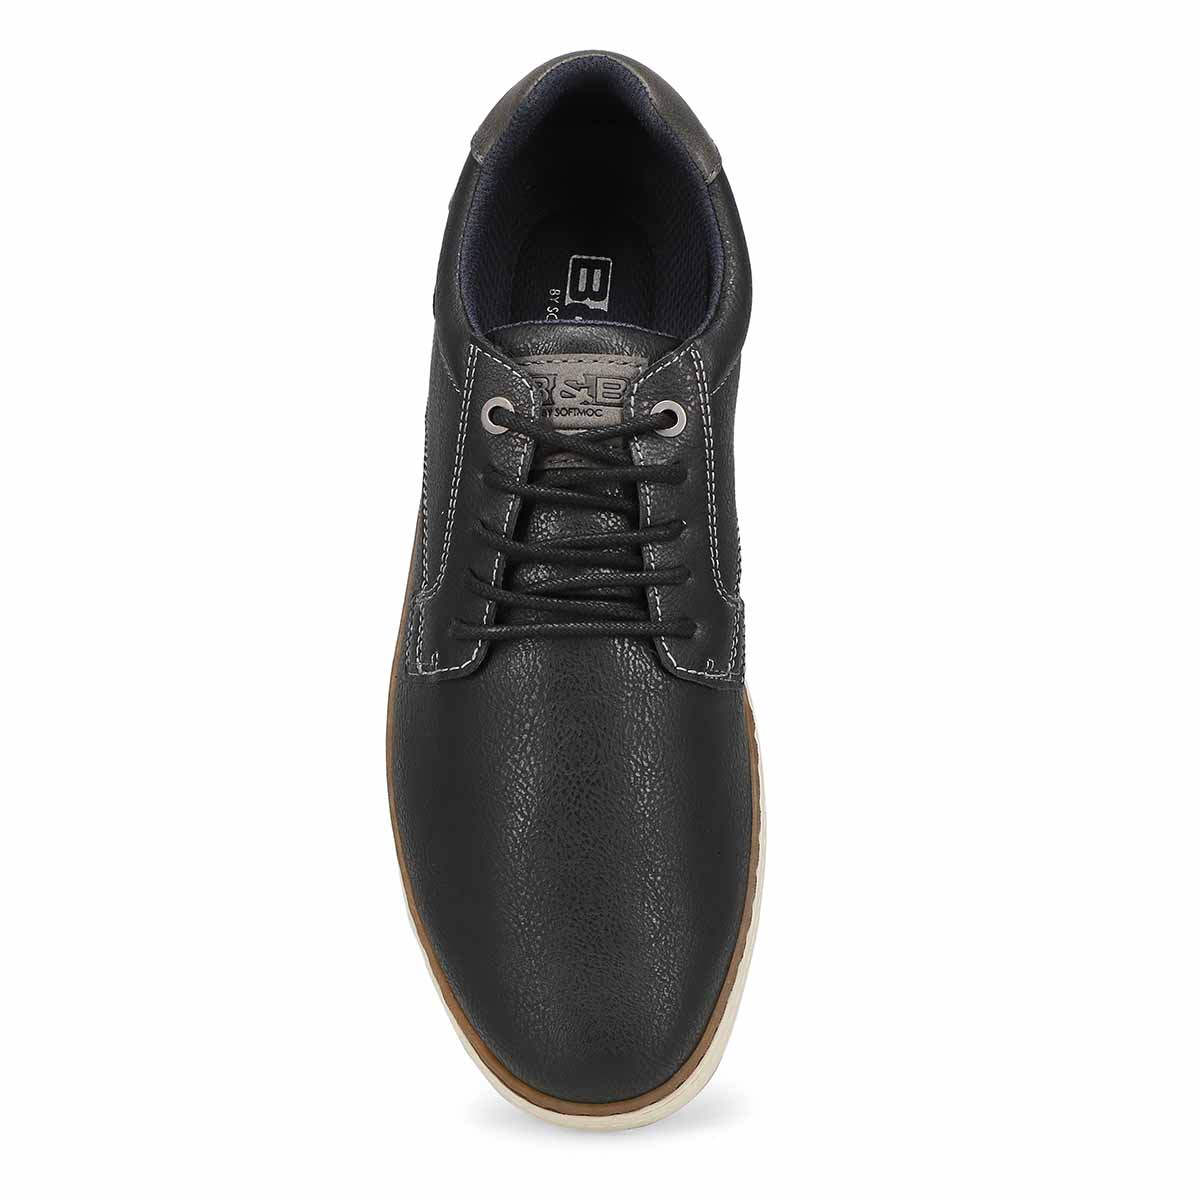 Mens Bjorn Lace Up Casual Oxford - Black